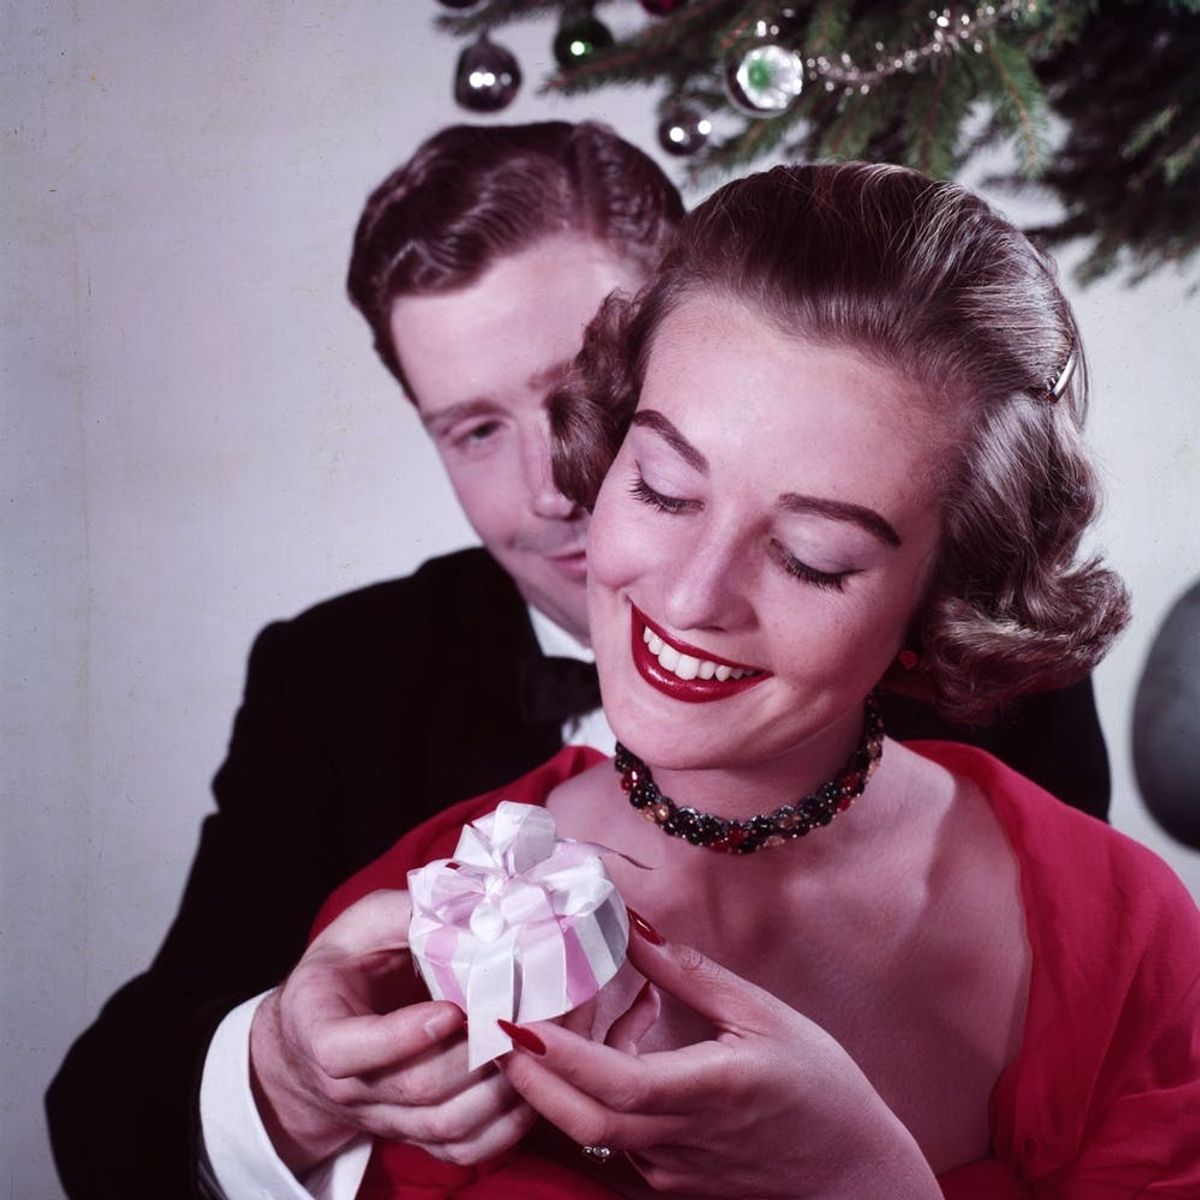 It’s Time to Shut Down the ‘Baby It’s Cold Outside’ Debate Once and for All